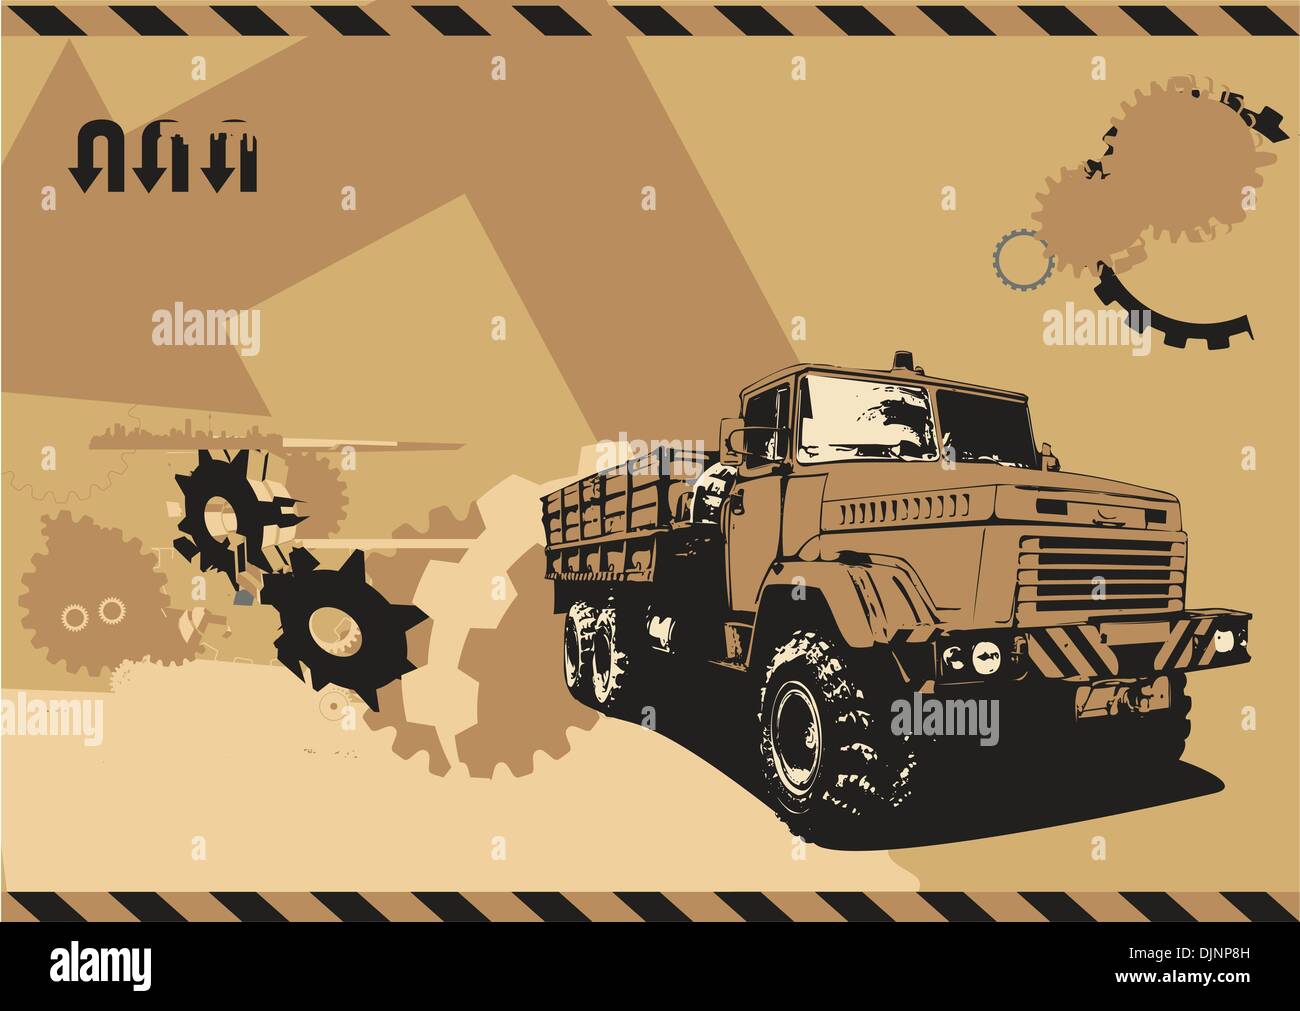 vector  illustration of vintage  truck in a  grunge style on urban background Stock Vector